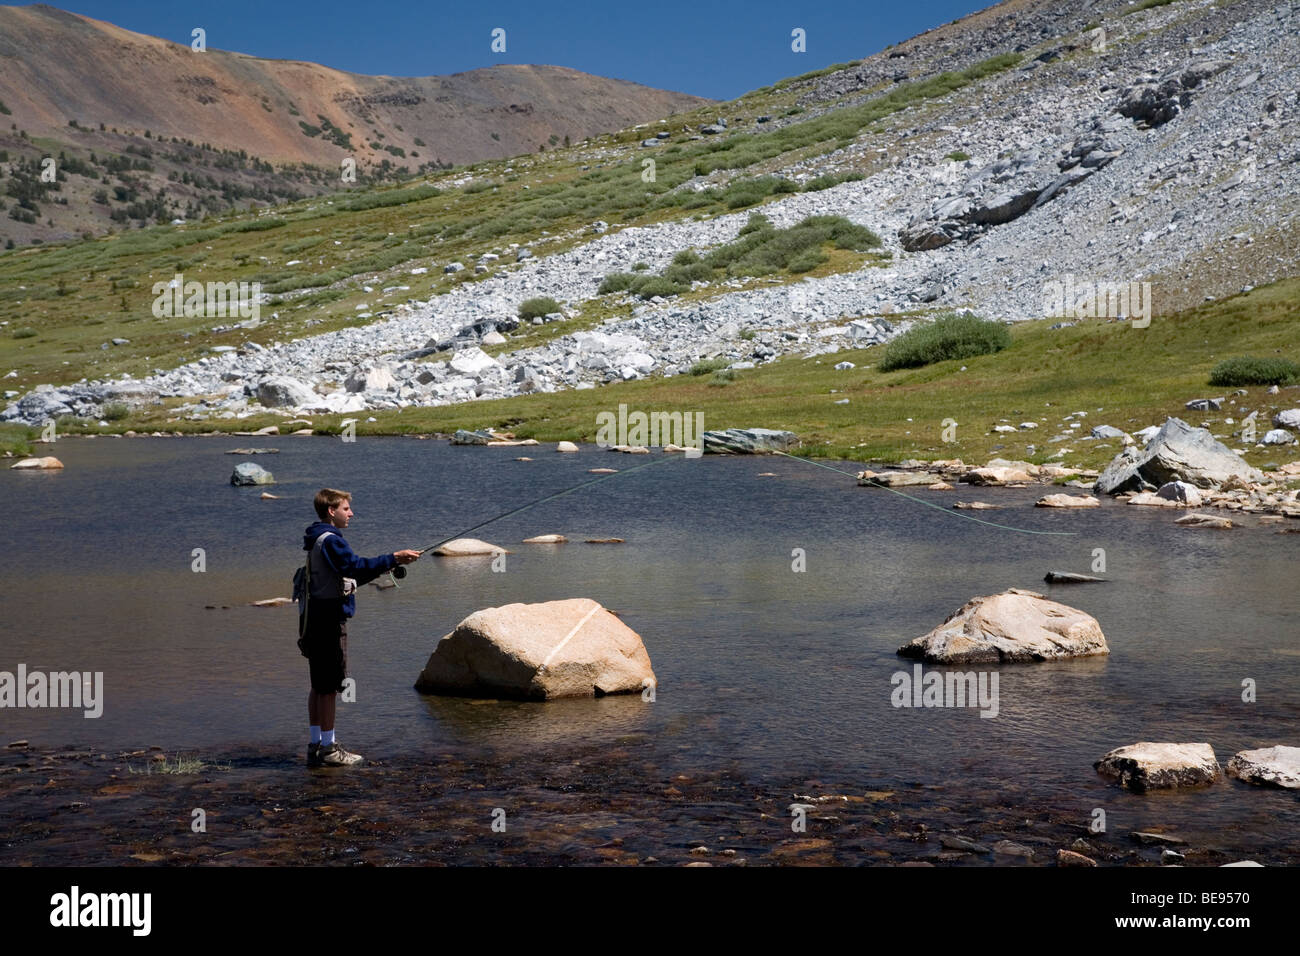 Young man fly fishing in stream near Greenstone and Conness Lakes, Inyo National Forest, California Stock Photo